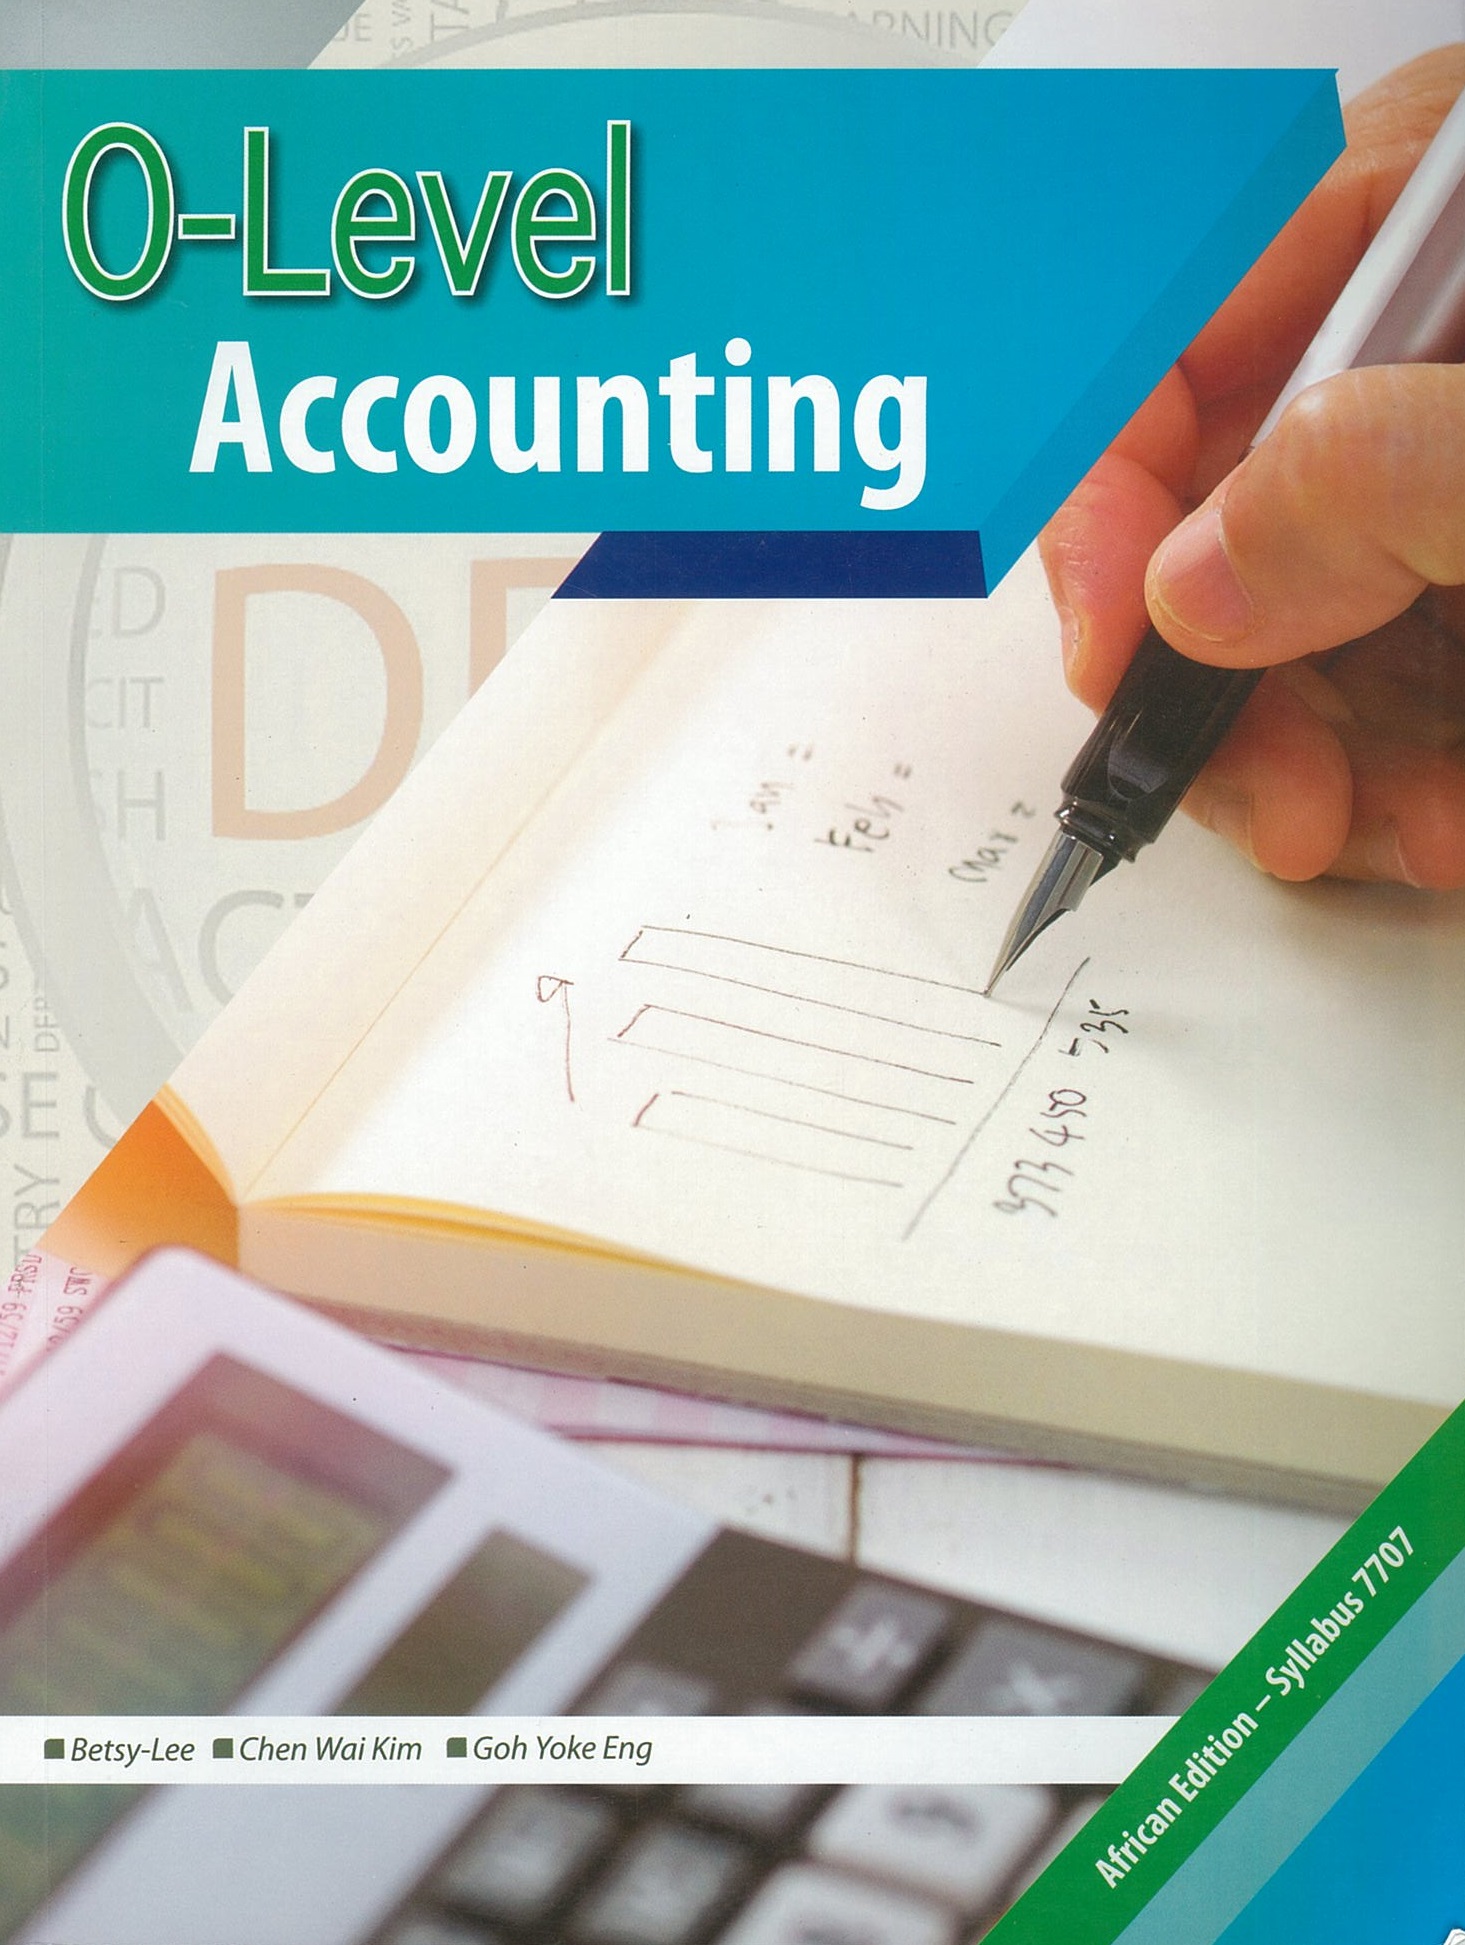 ELP - ACCOUNTING FOR O LEVEL - BETSY LEE